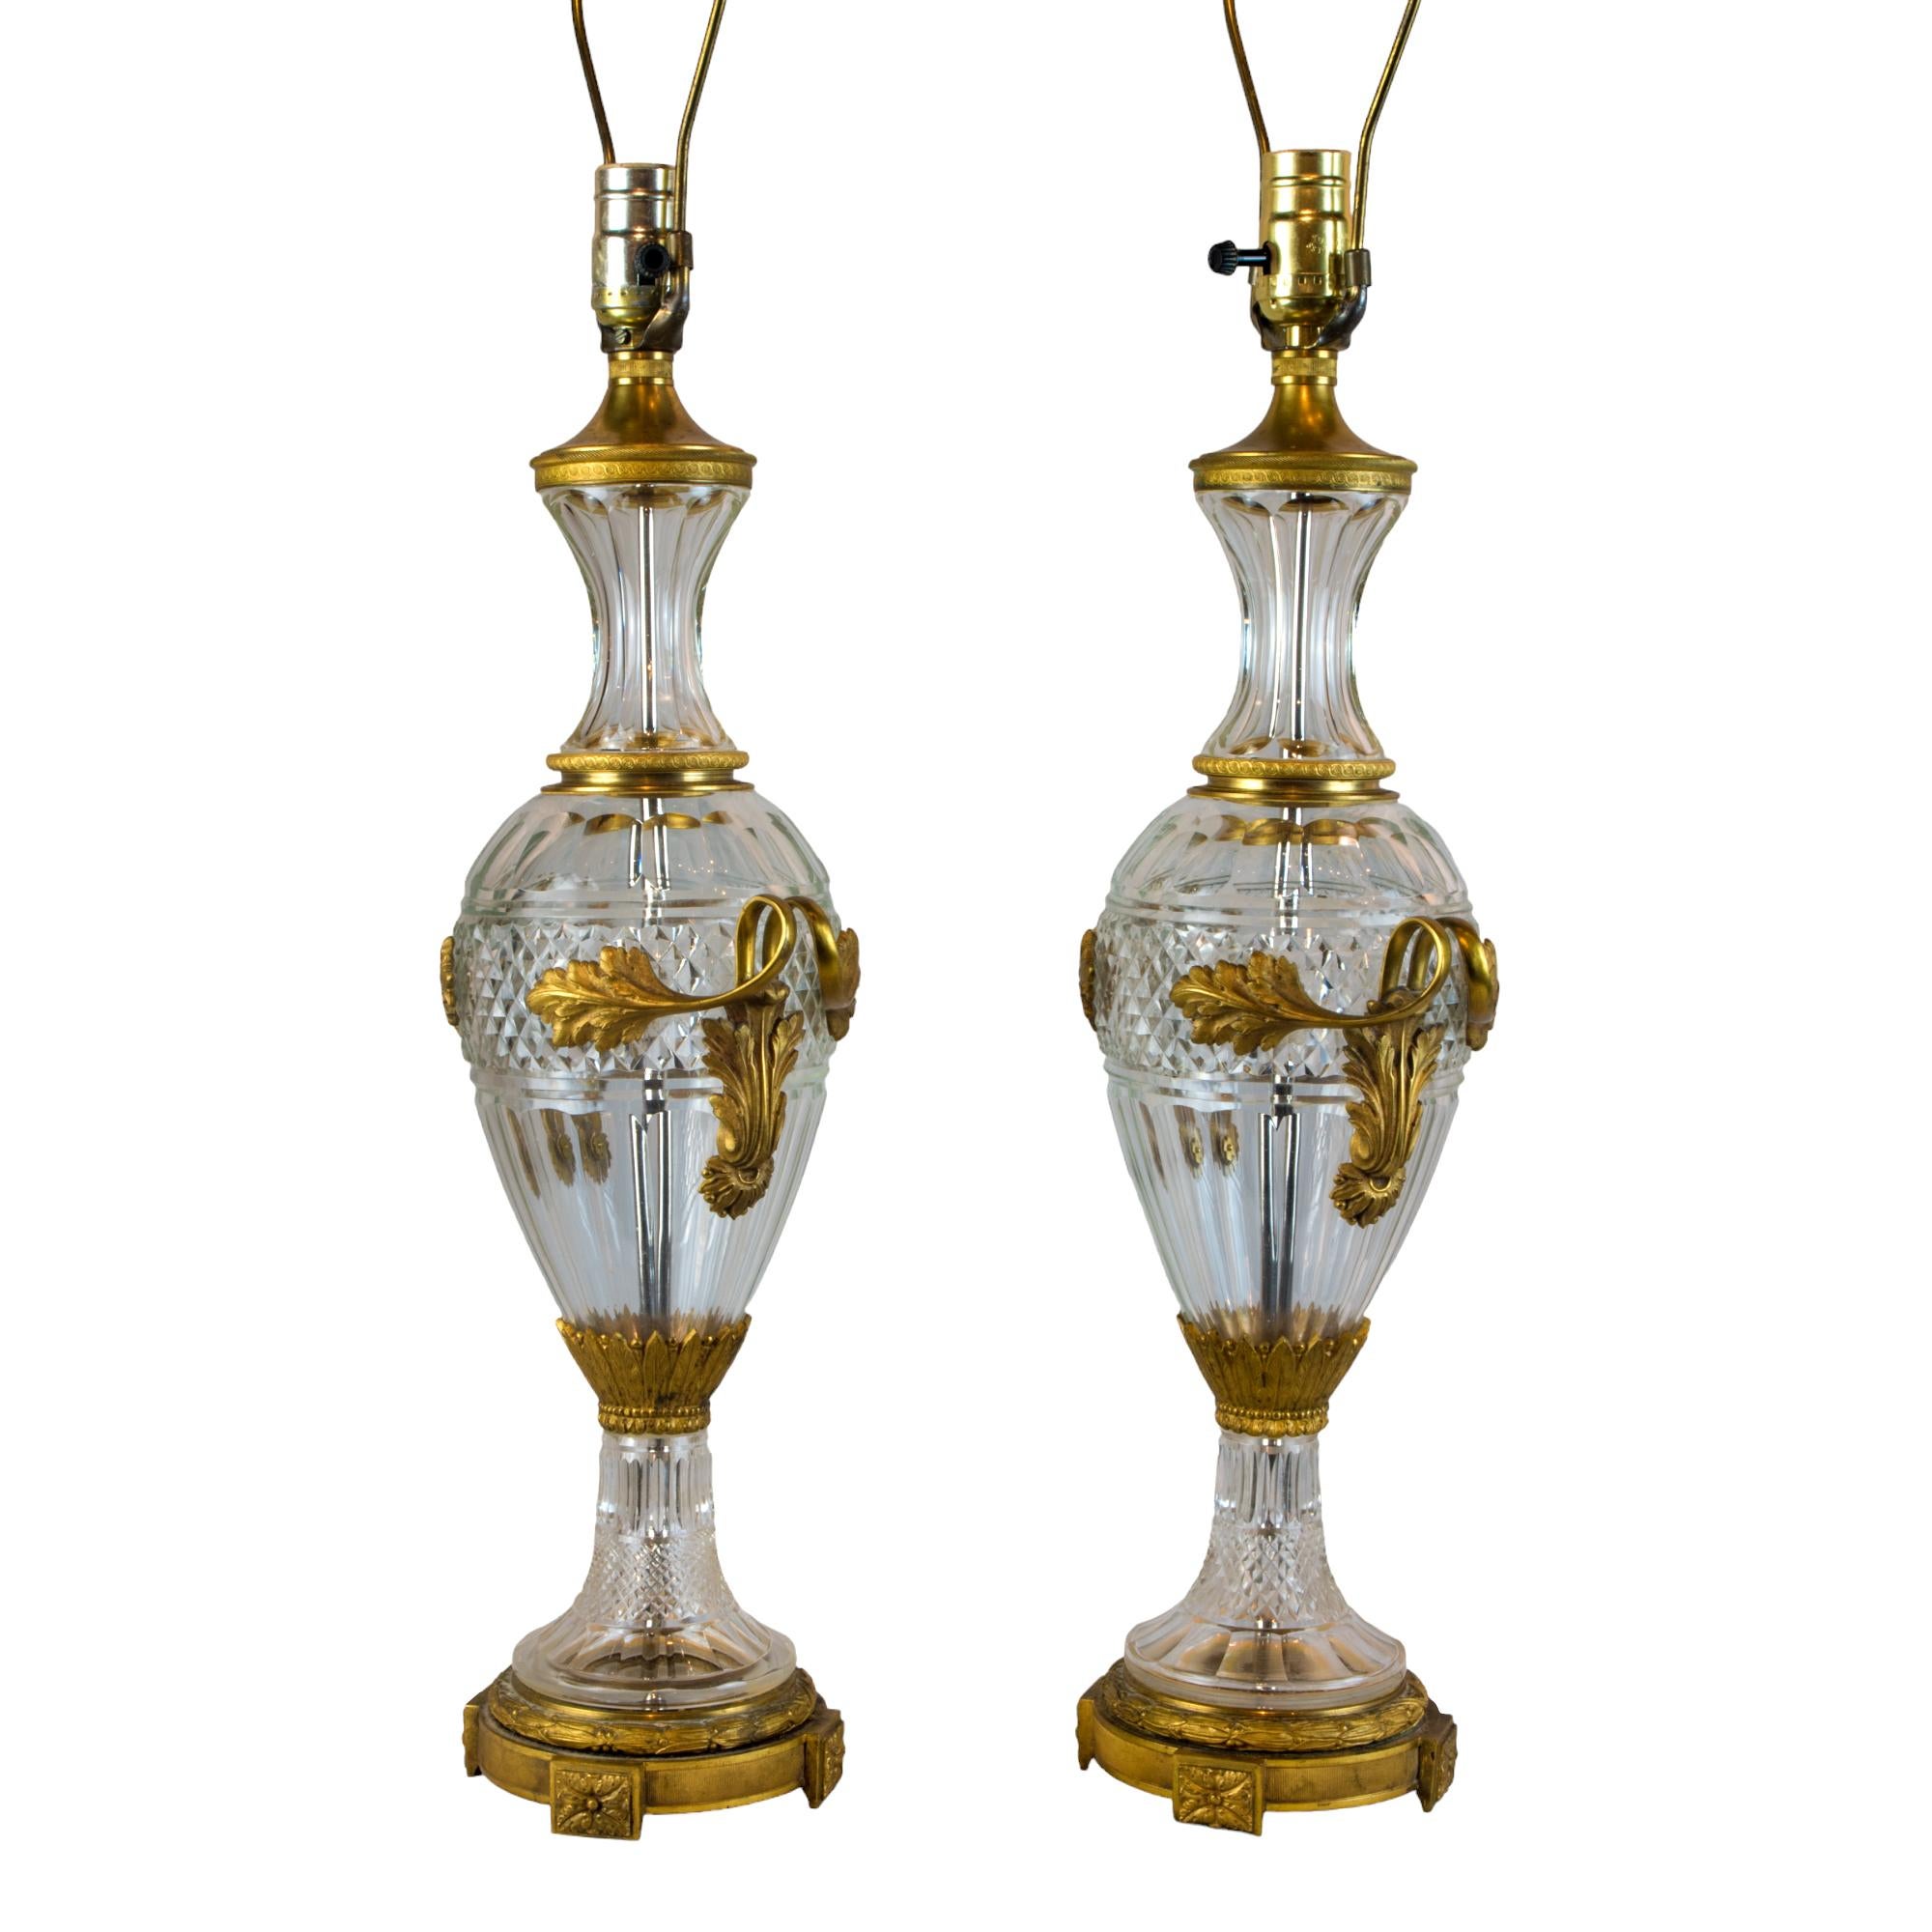 This lavish pair of Louis XVI Style Gilt-Bronze Mounted Cut Glass Two-Handled Table Lamps embodies the early 19th century spirit of grandiose decoration and inventive design.

Each lamp consists of an inverted baluster form vessel of cut crystal set